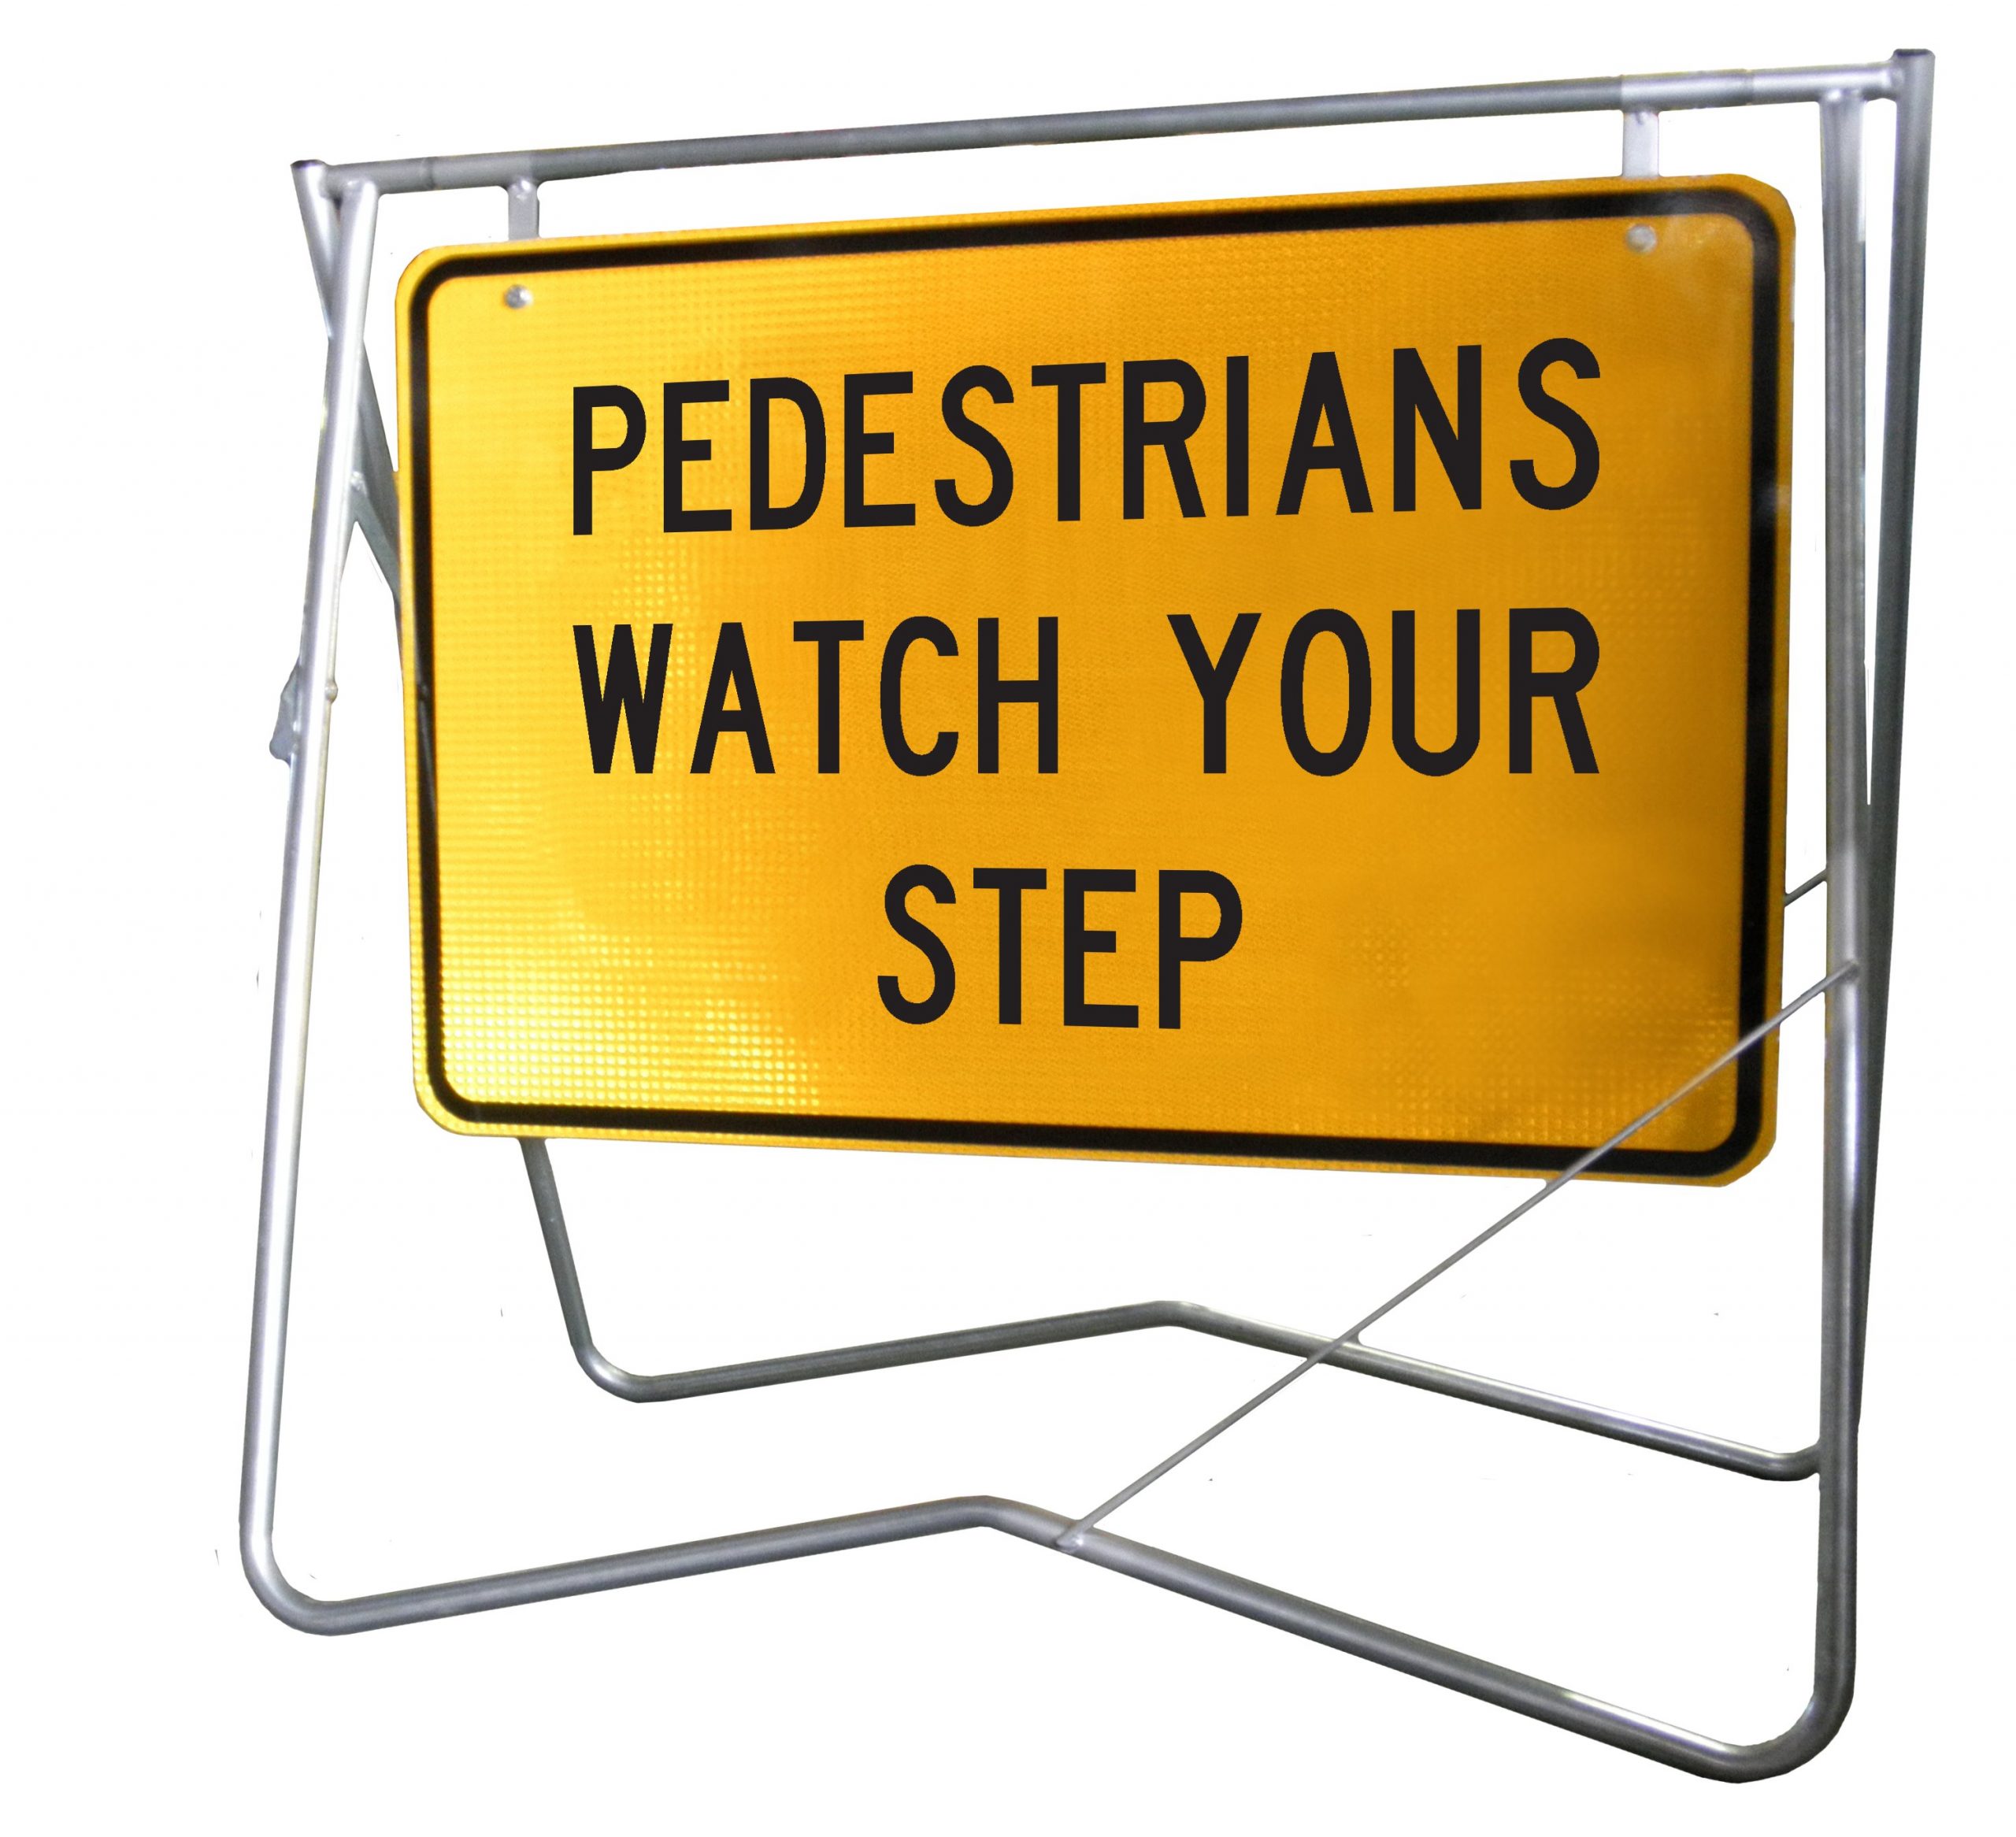 Pedestrains Watch Your Step - 900 x 600 - Mounted on Swing Stand